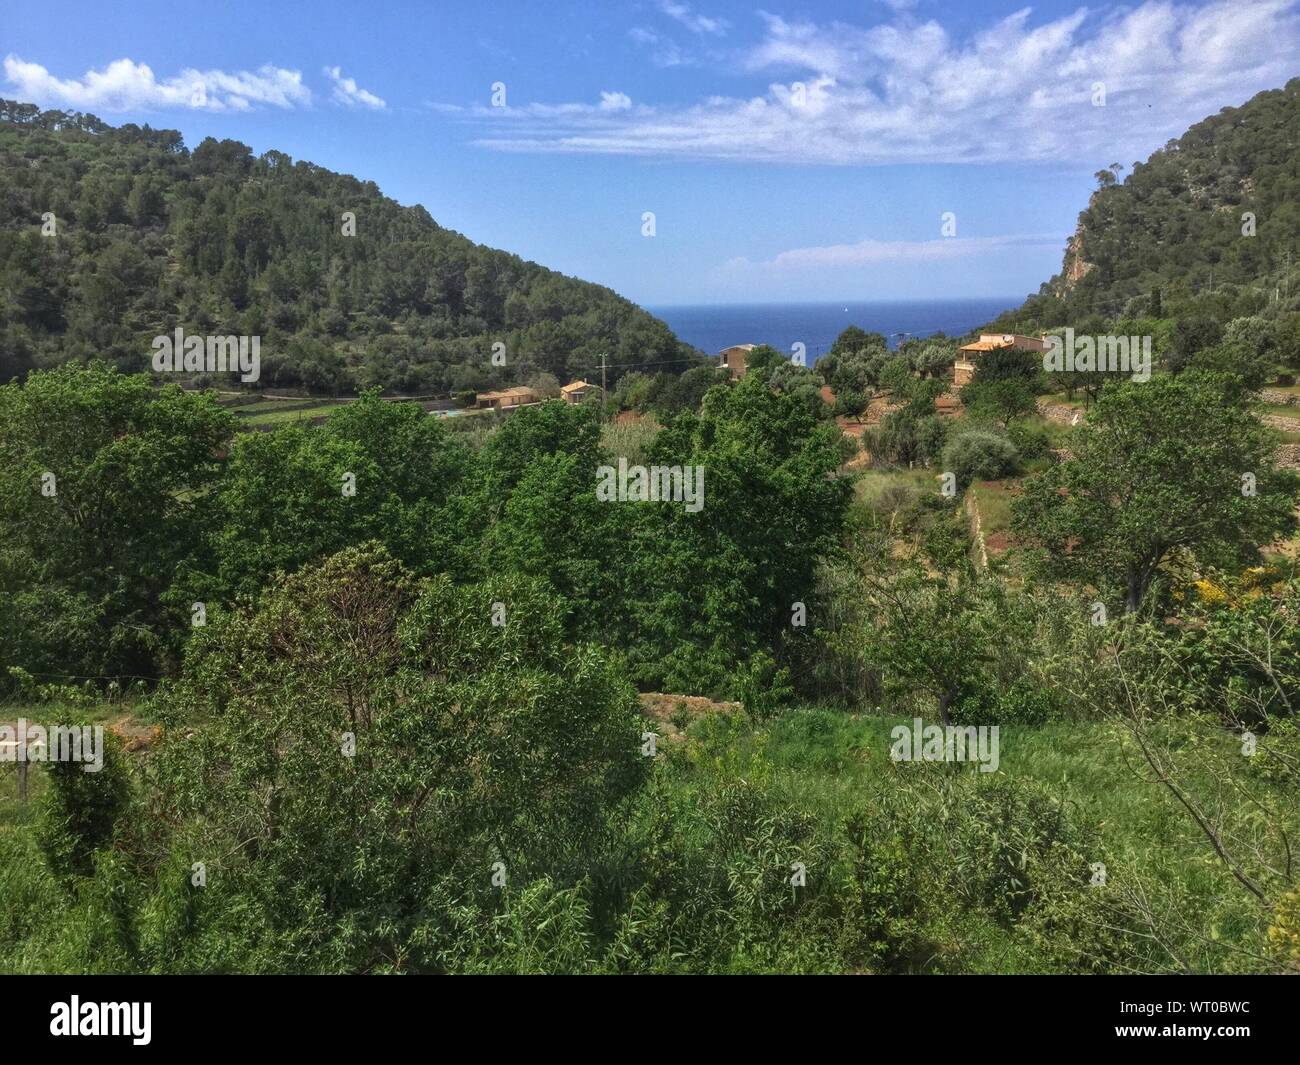 Wooded Valley Amid Hills Stock Photo